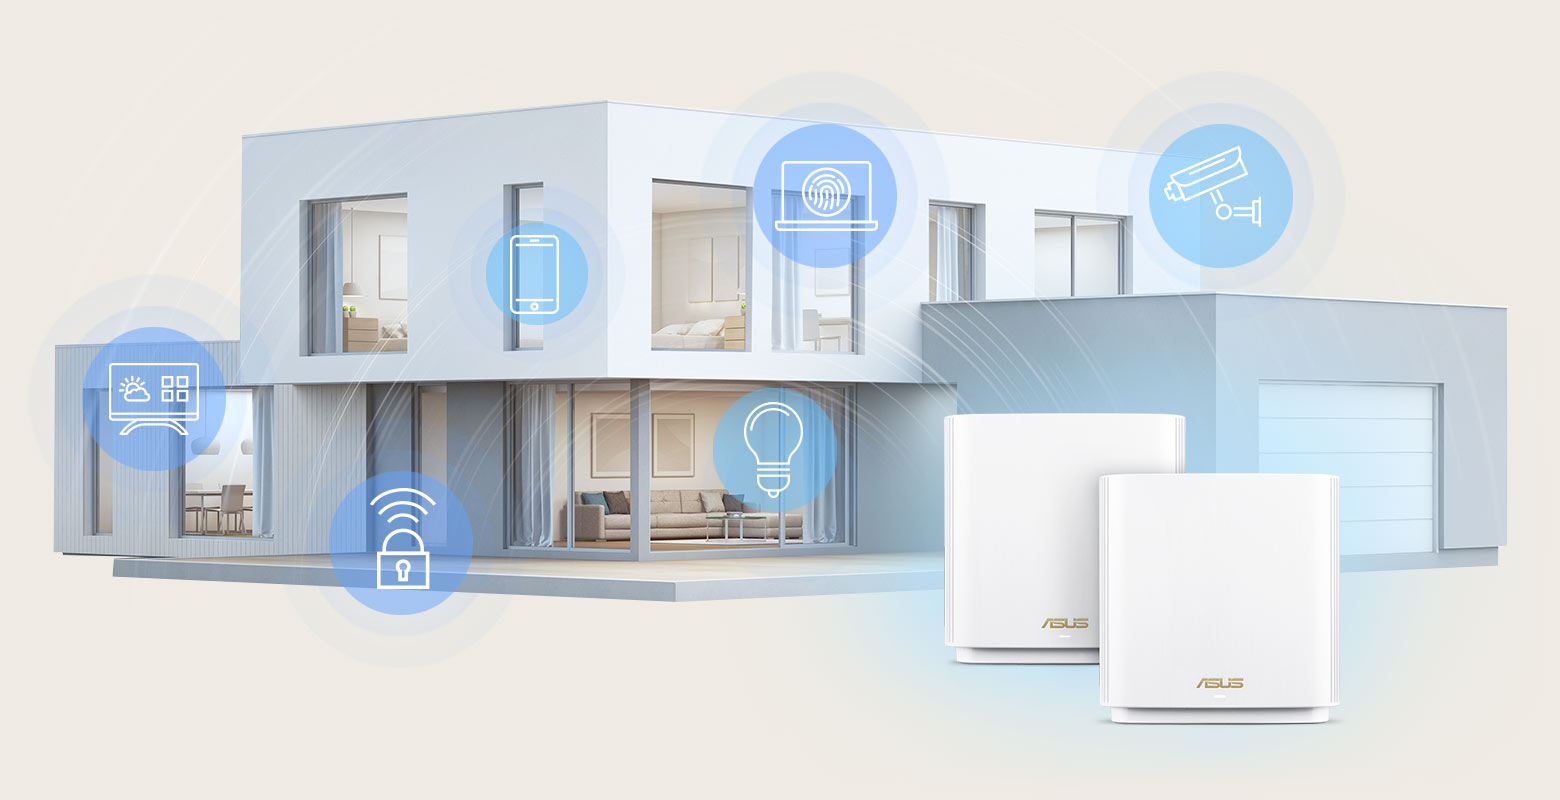 ASUS ZenWiFi XT9 mesh routers offer house-wide WiFi coverage of up to 5700 square feet for you to connect all your IoT home gadgets.